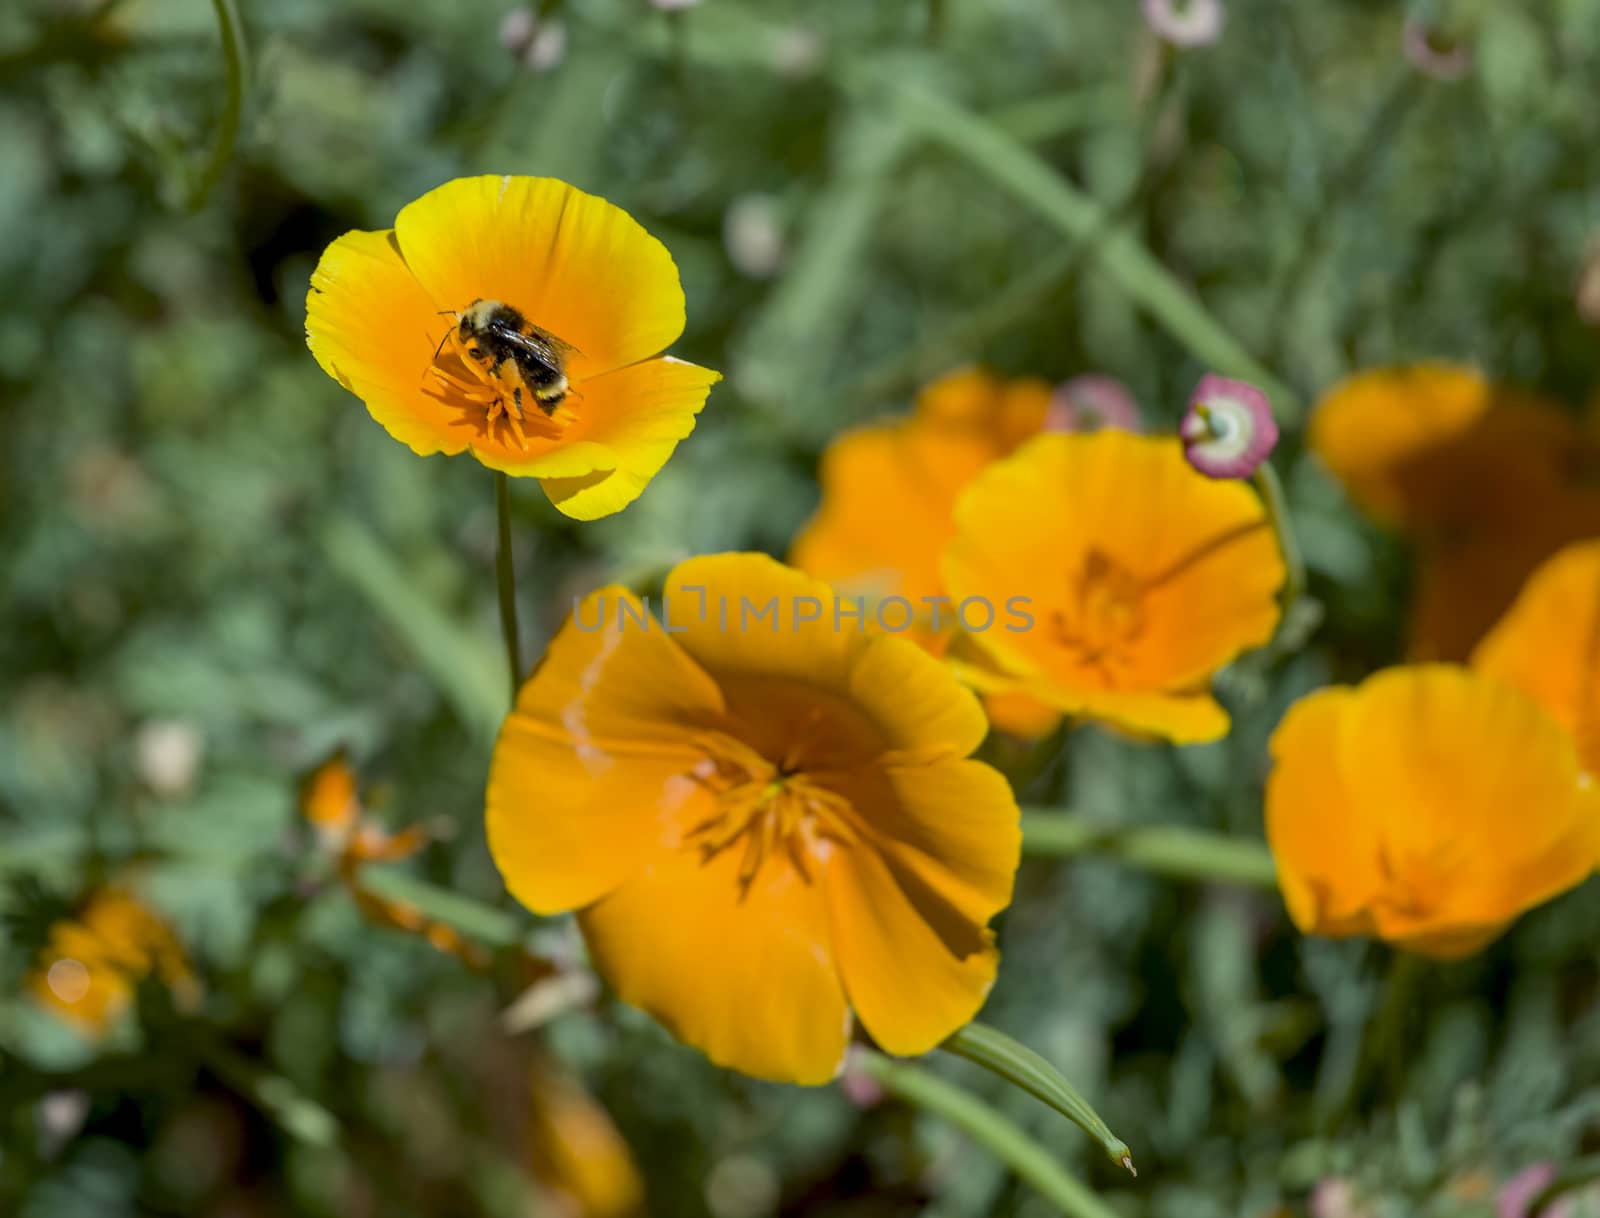 This photo was taken at a formal botanical garden near San Francisco, California. Spring had arrived, and flowers are in bloom. This image features a beautiful California Poppies and Bumble Bees collecting Pollen.